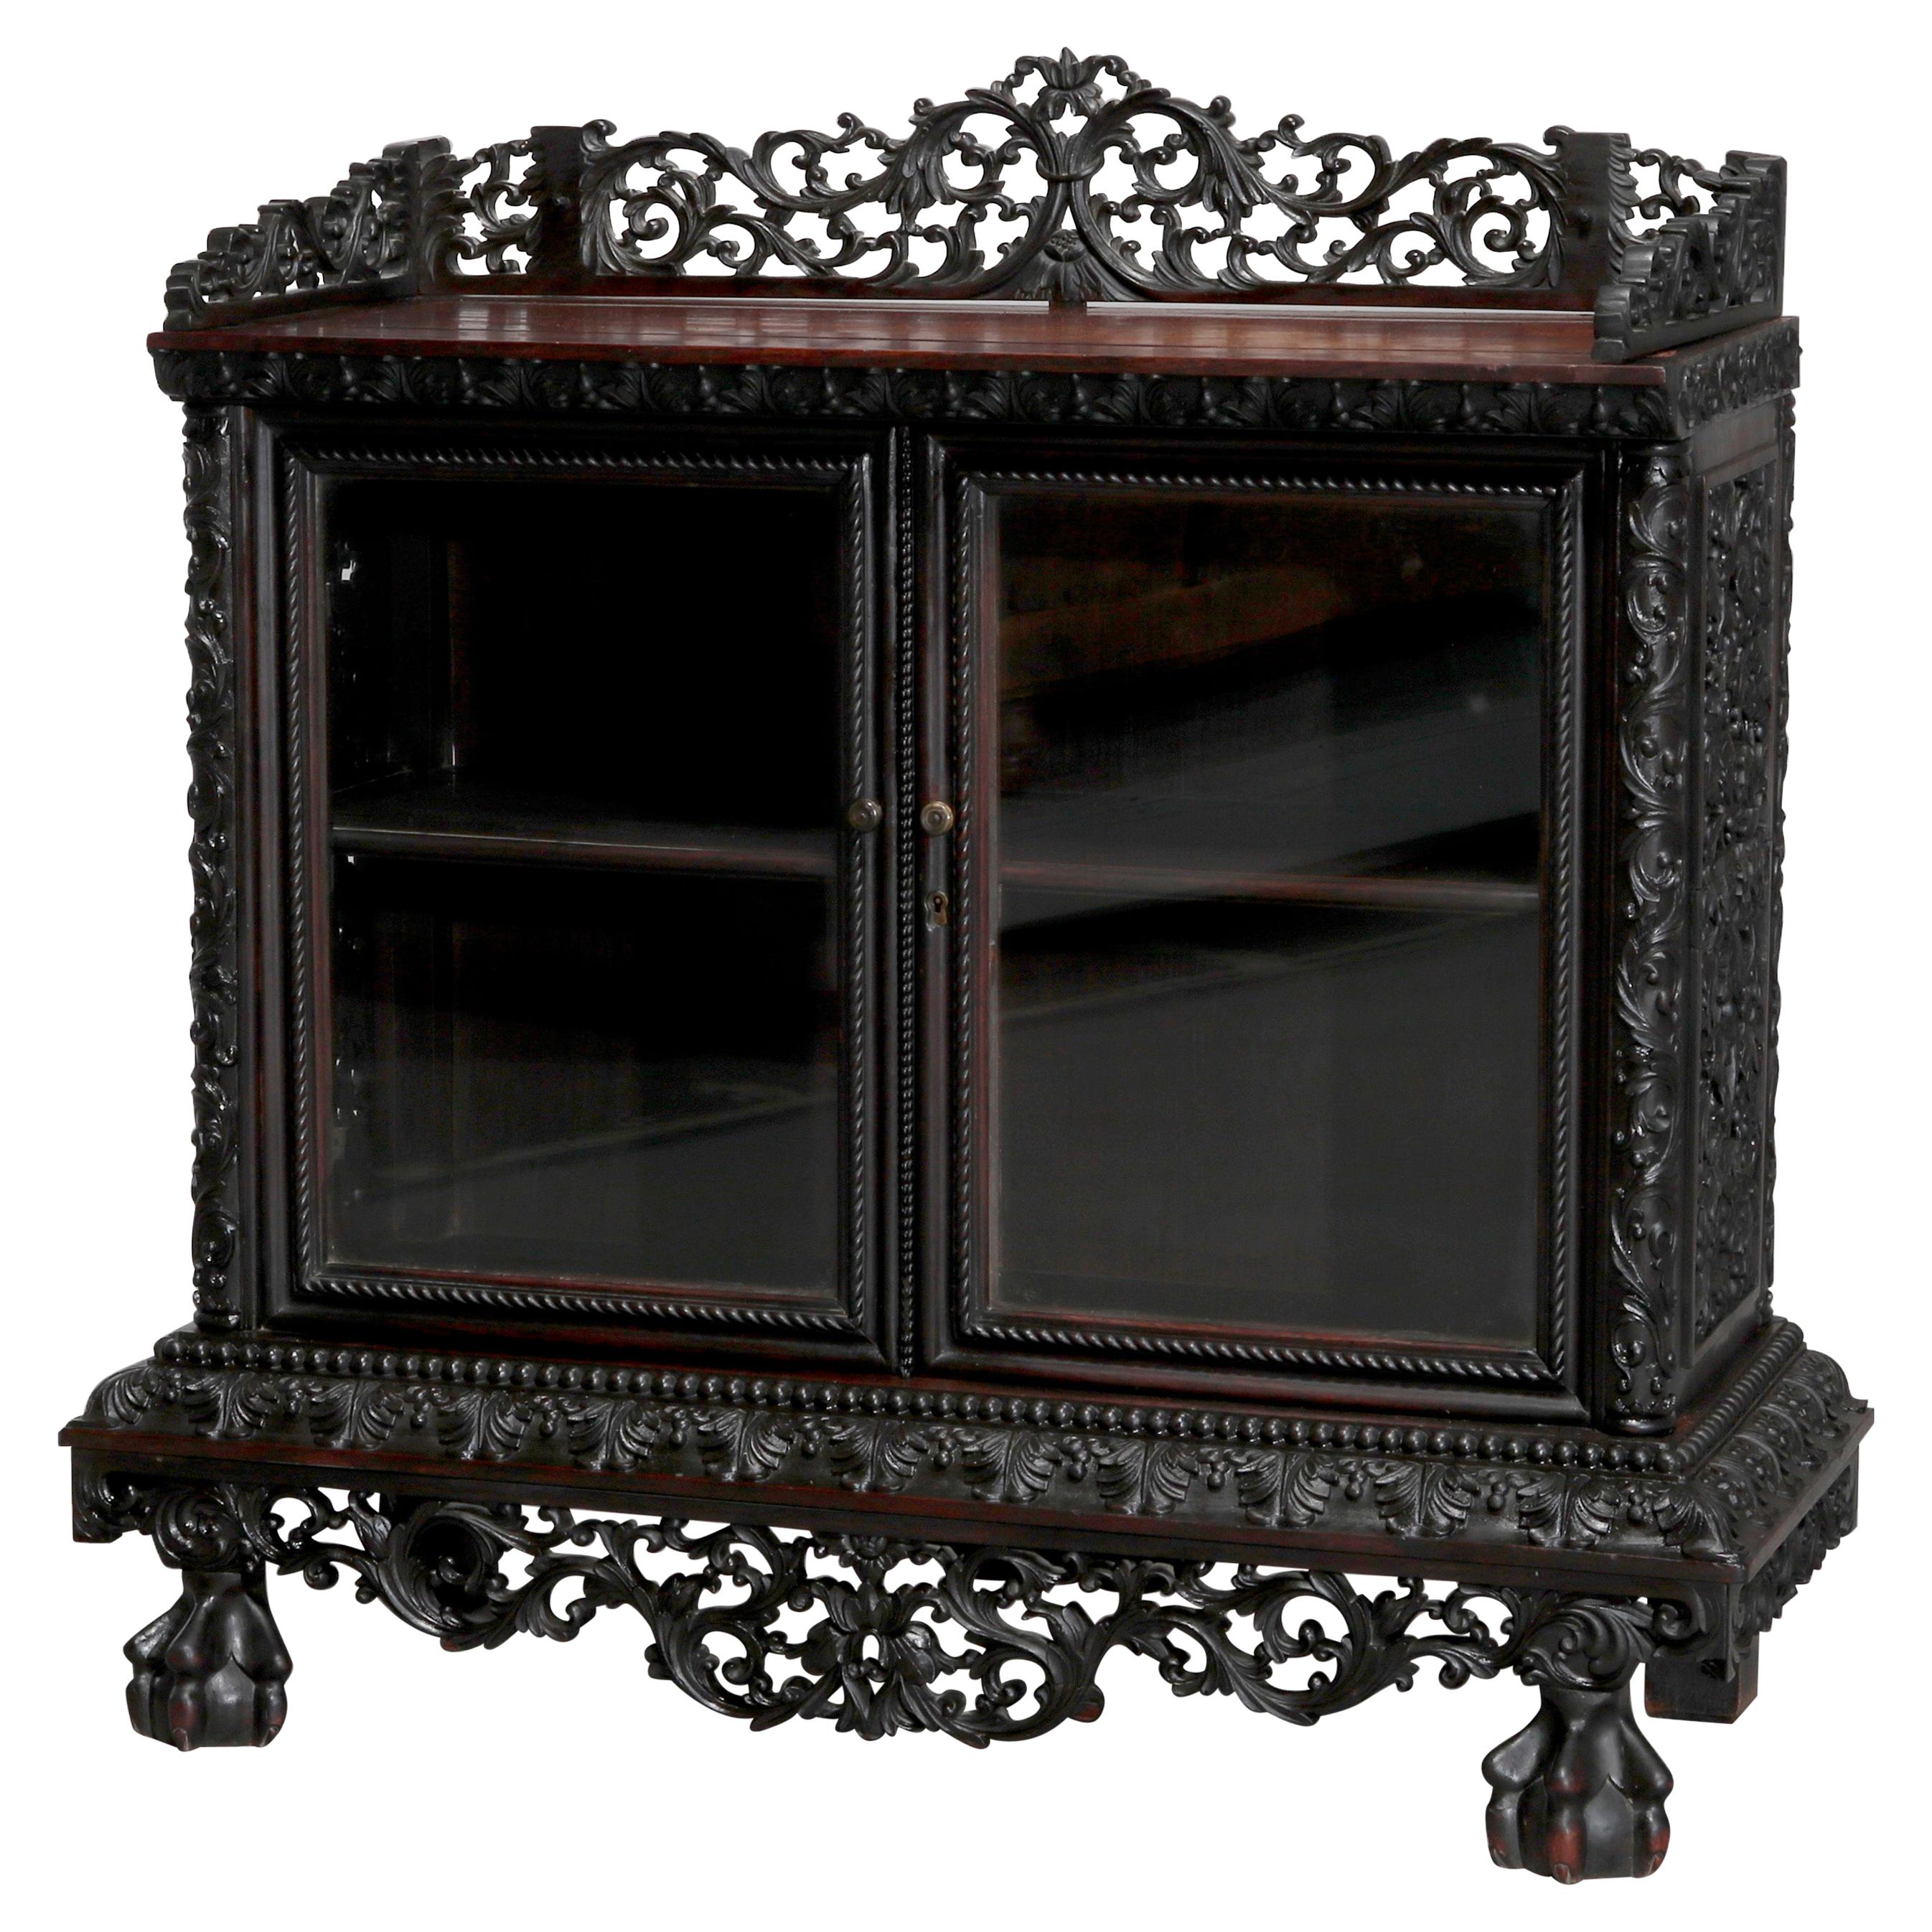 Antique Chinese Foliate Carved Rosewood Double Door Tea Cabinet, 19th Century